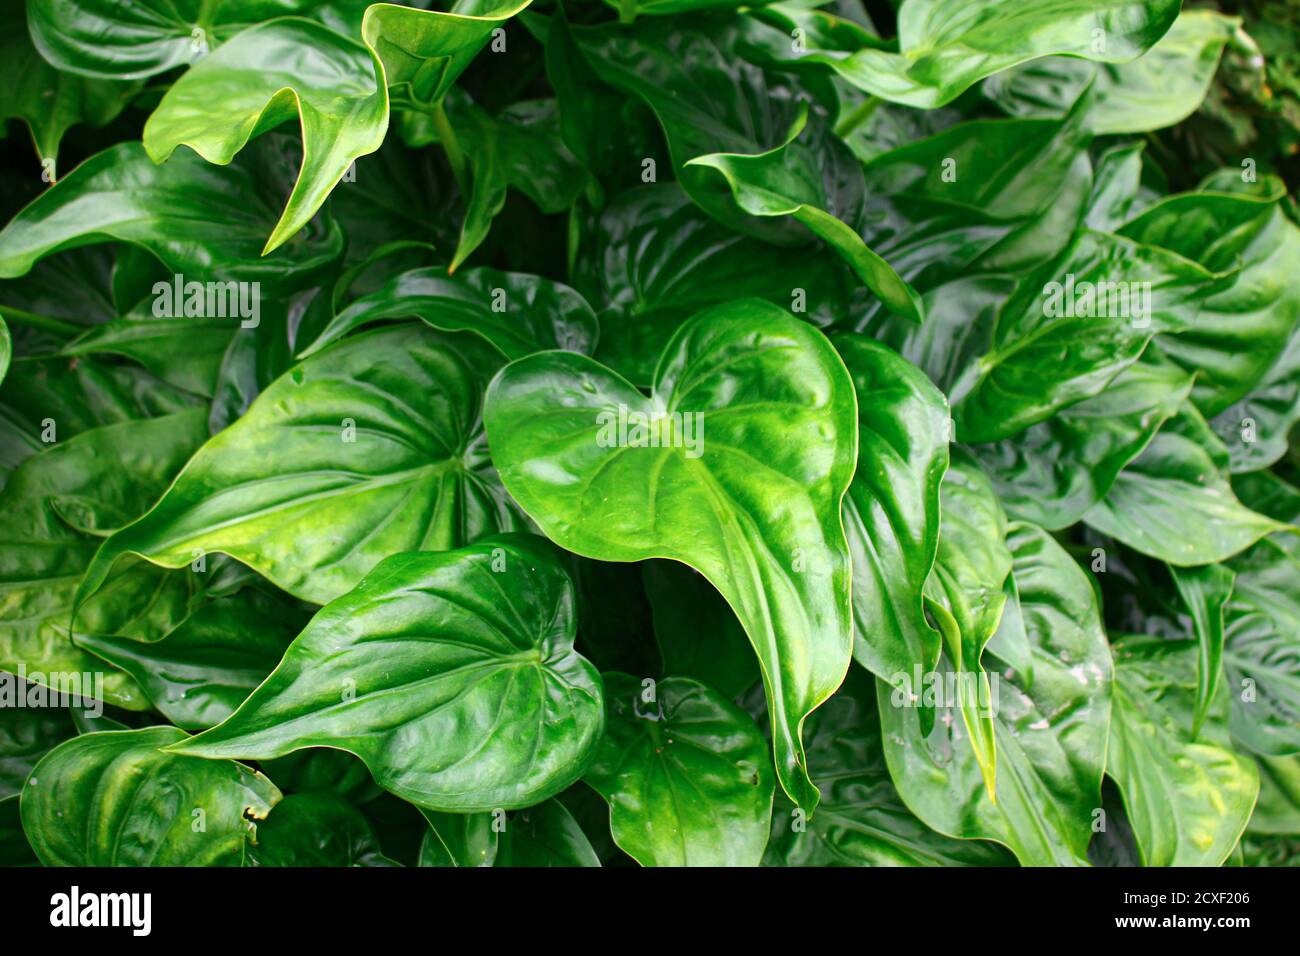 Tropical Green leaves,leaves texture asia nature image Stock Photo